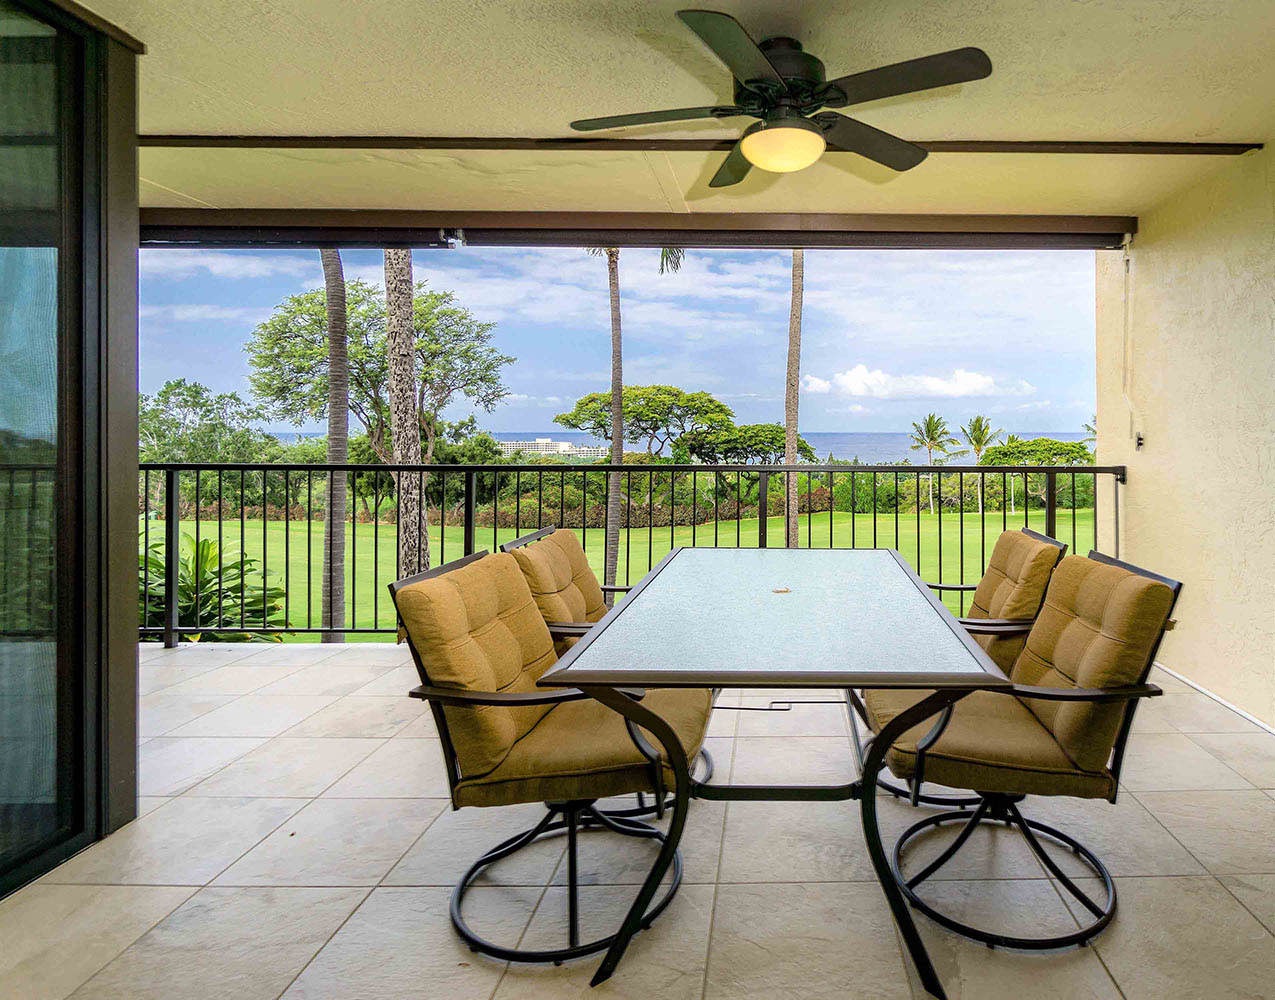 Private lanai with patio table and BBQ grill